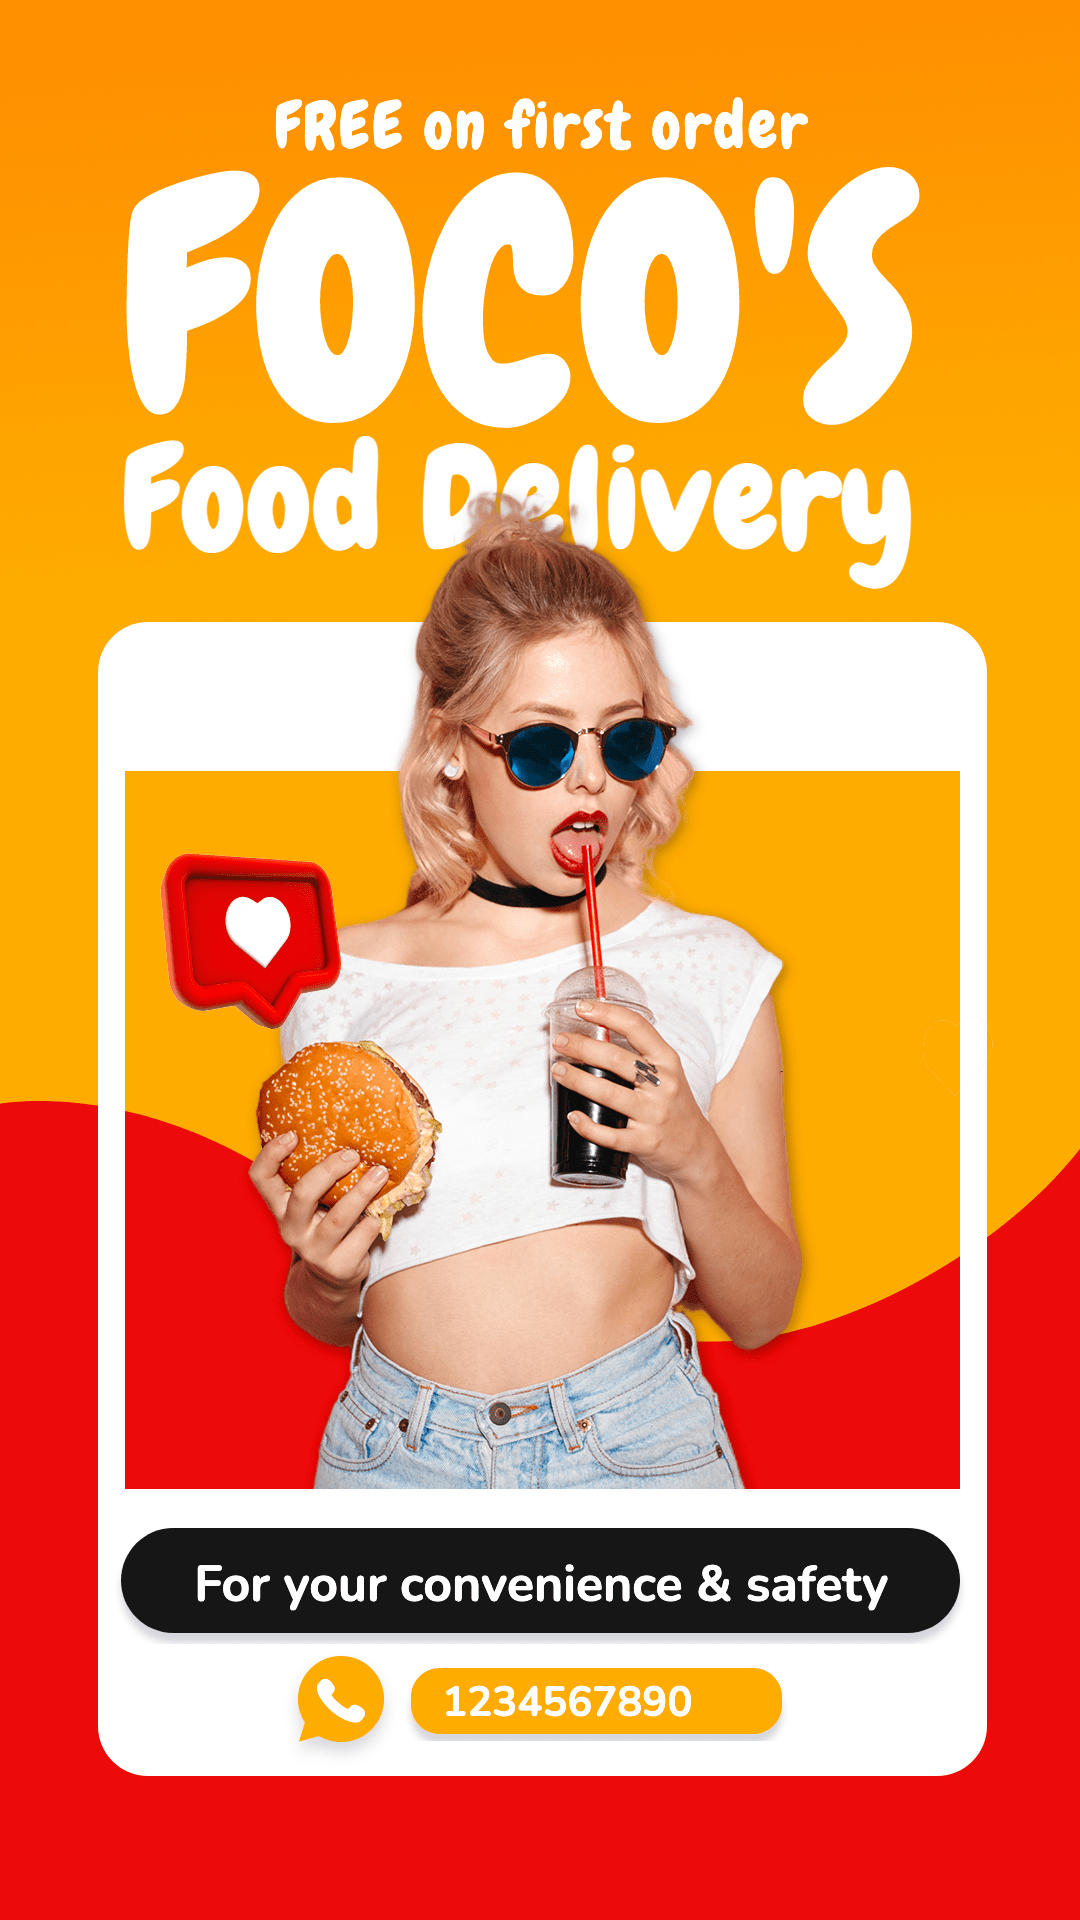 Food Delivery Services Promotion Cutout Ecommerce Story预览效果